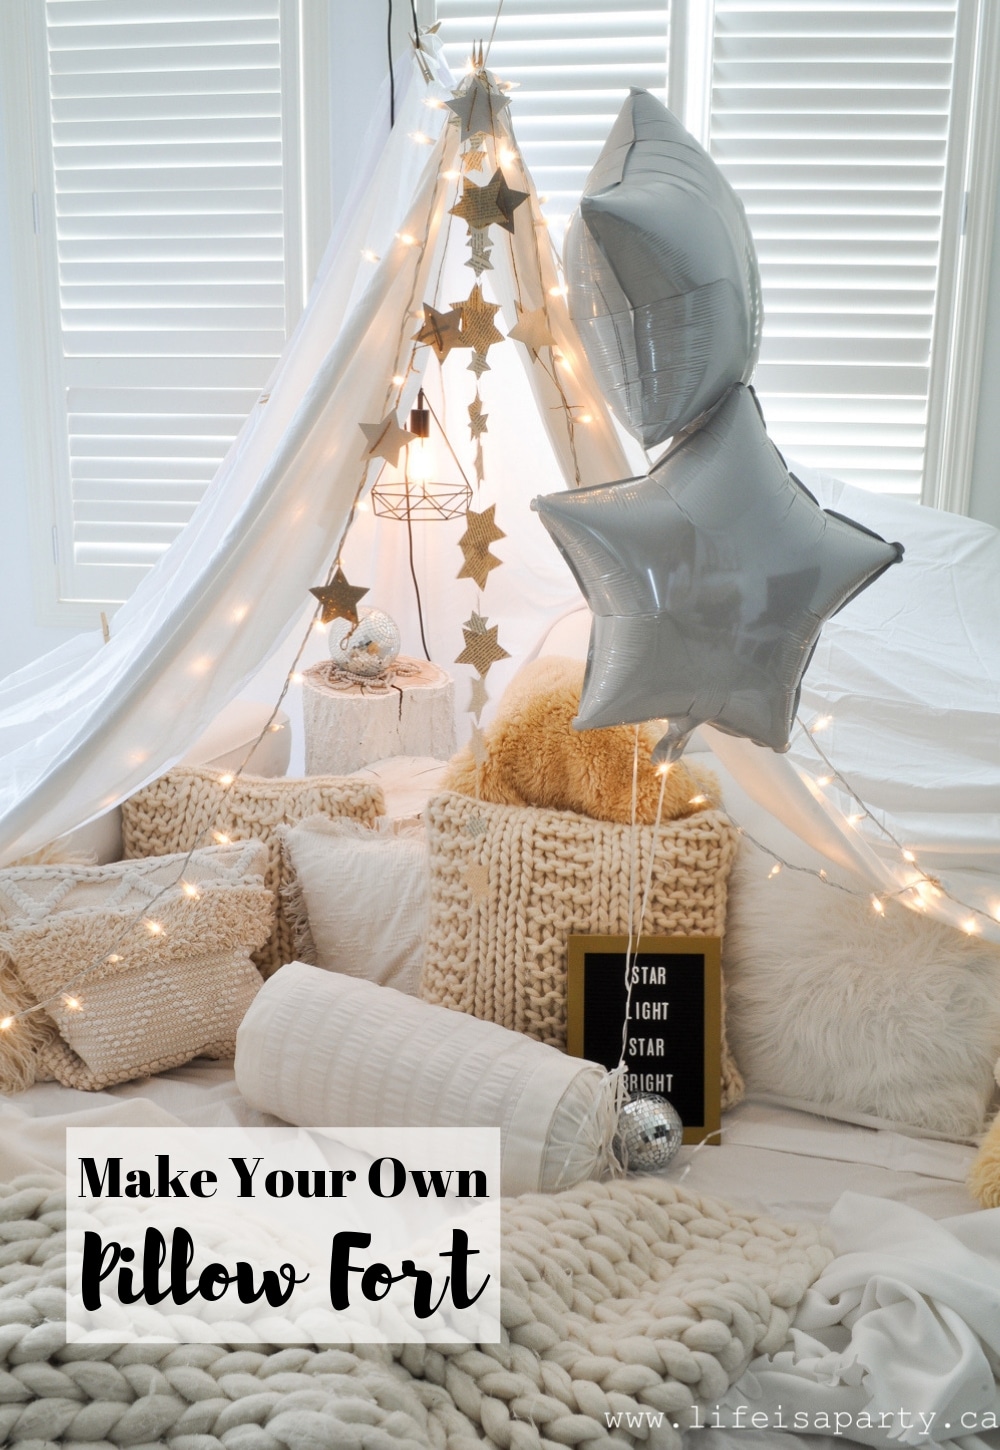 Pillow Fort -make a magical pillow fort with fairy lights and starry decorations, and even star themed snacks. Perfect for family fun or date night.